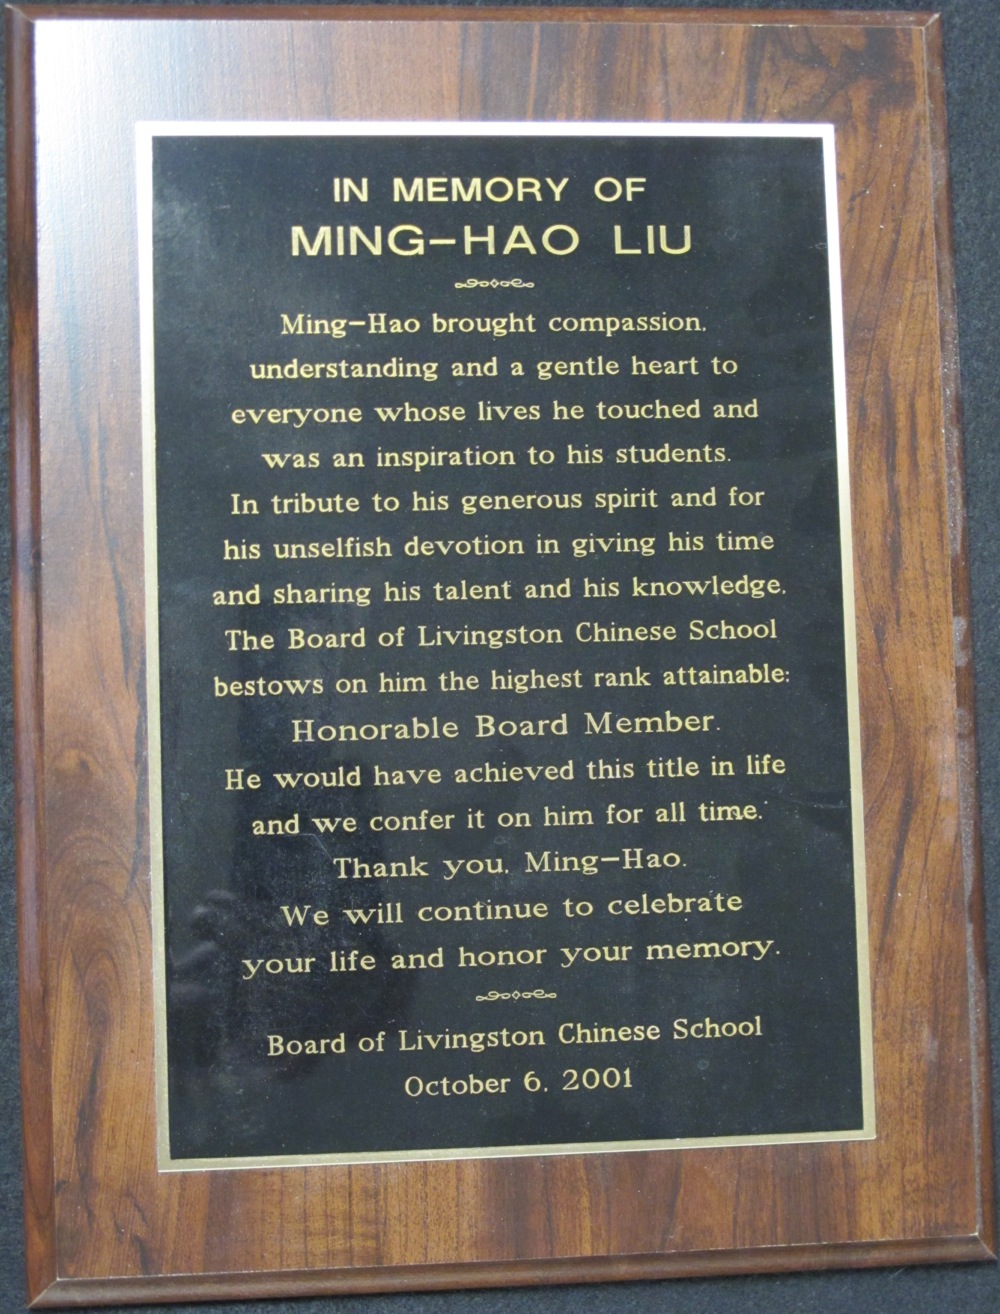 Memorial plaque donated by the Board of Livingston Chinese School